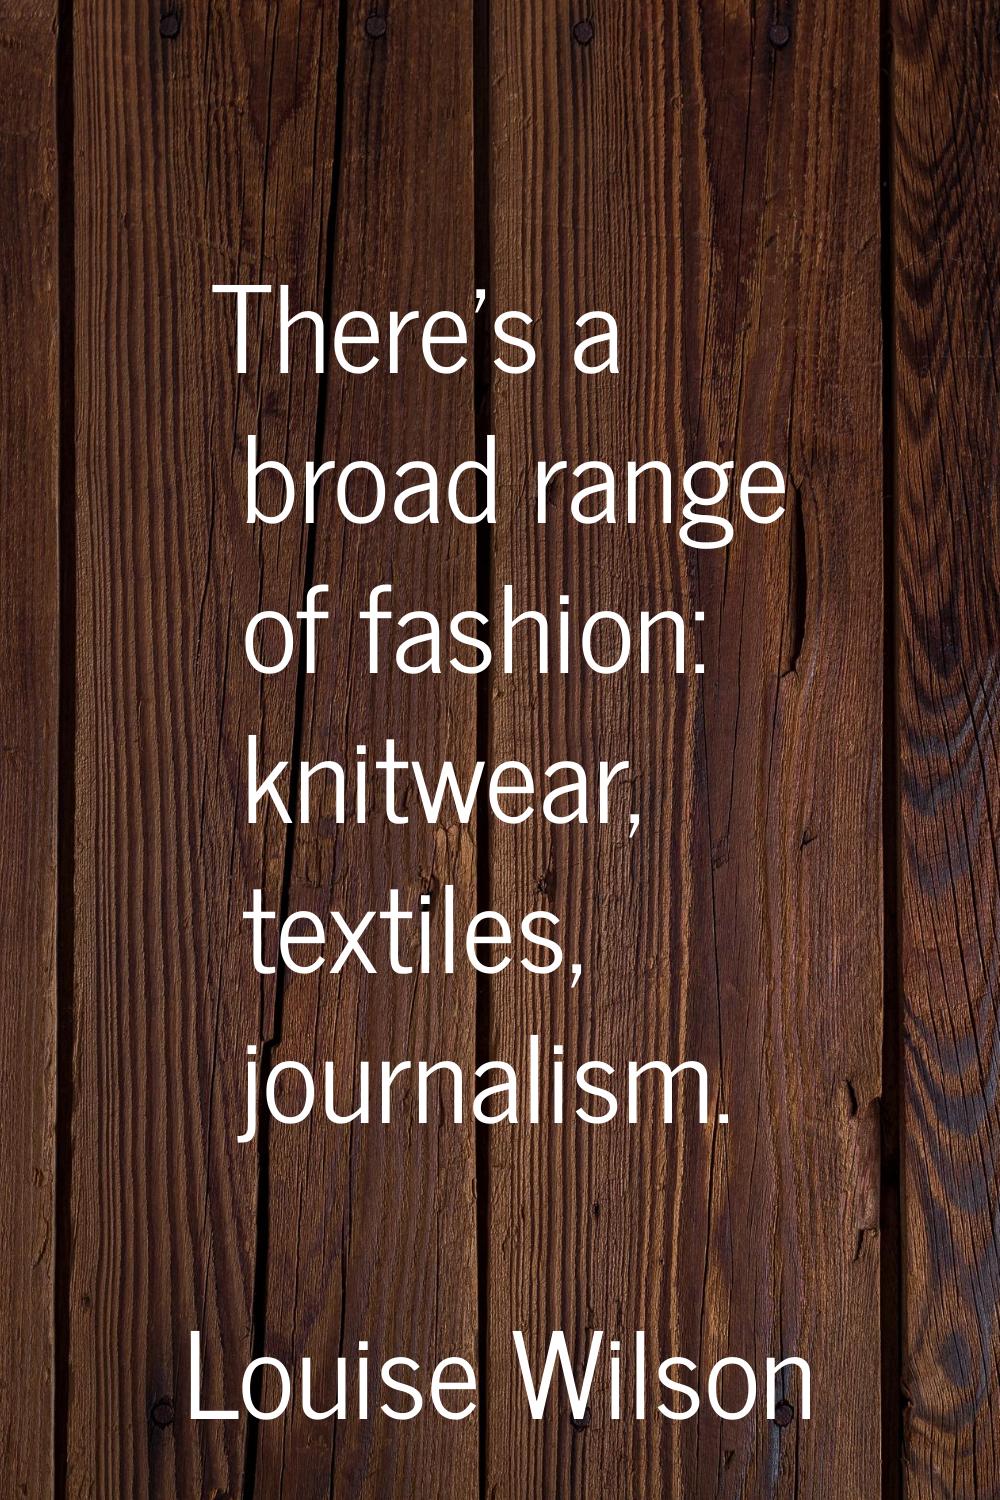 There's a broad range of fashion: knitwear, textiles, journalism.